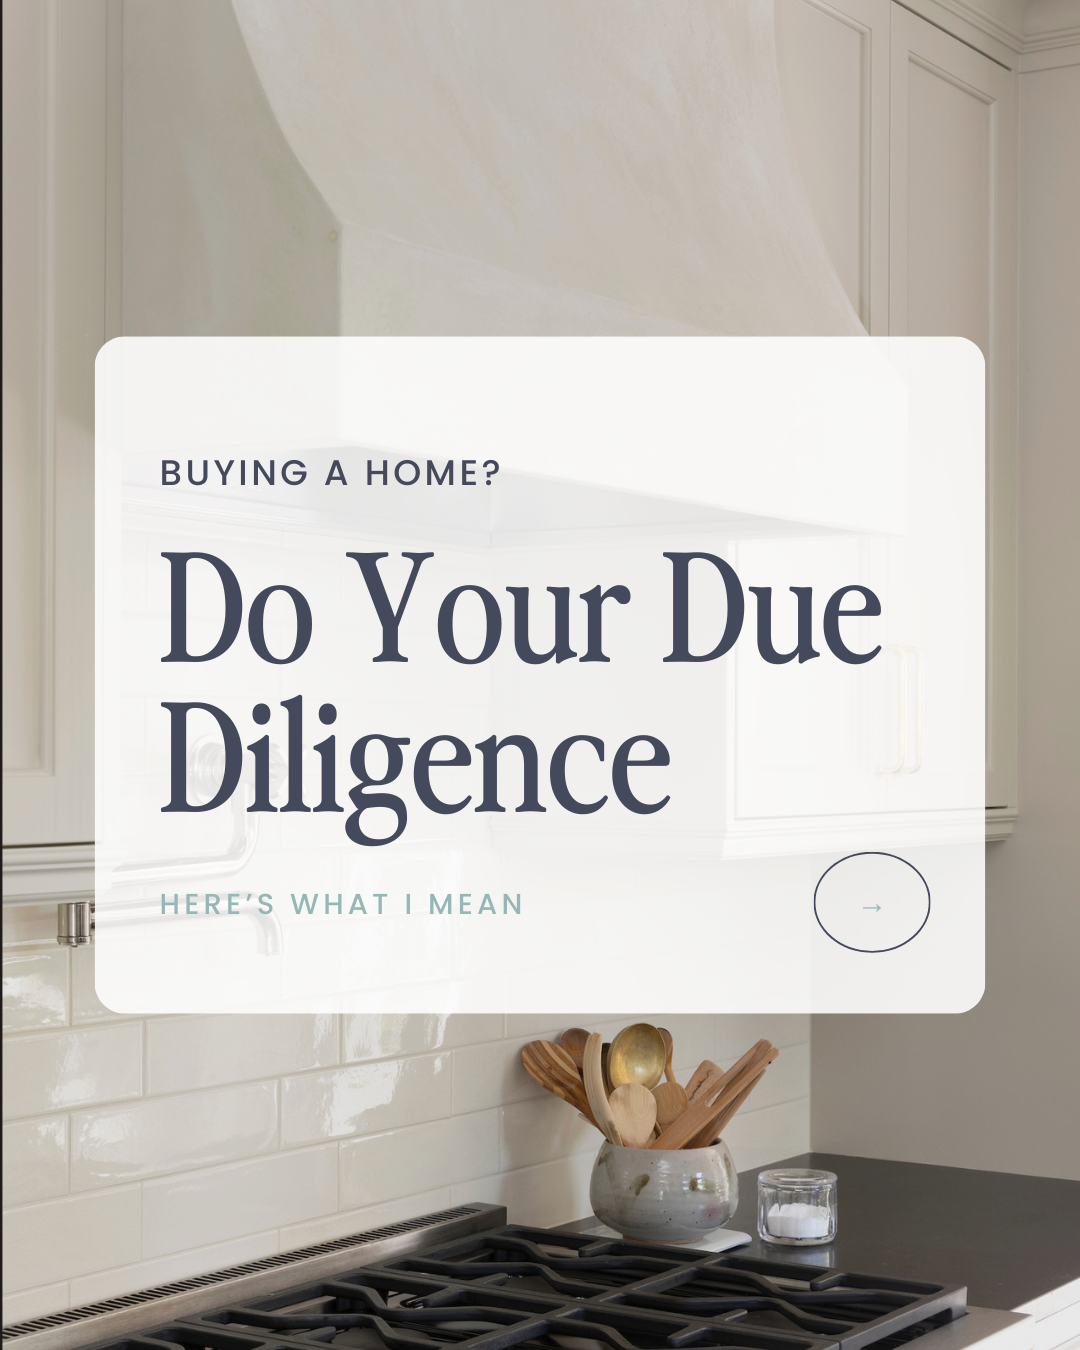 Do Your Own Due Diligence! 